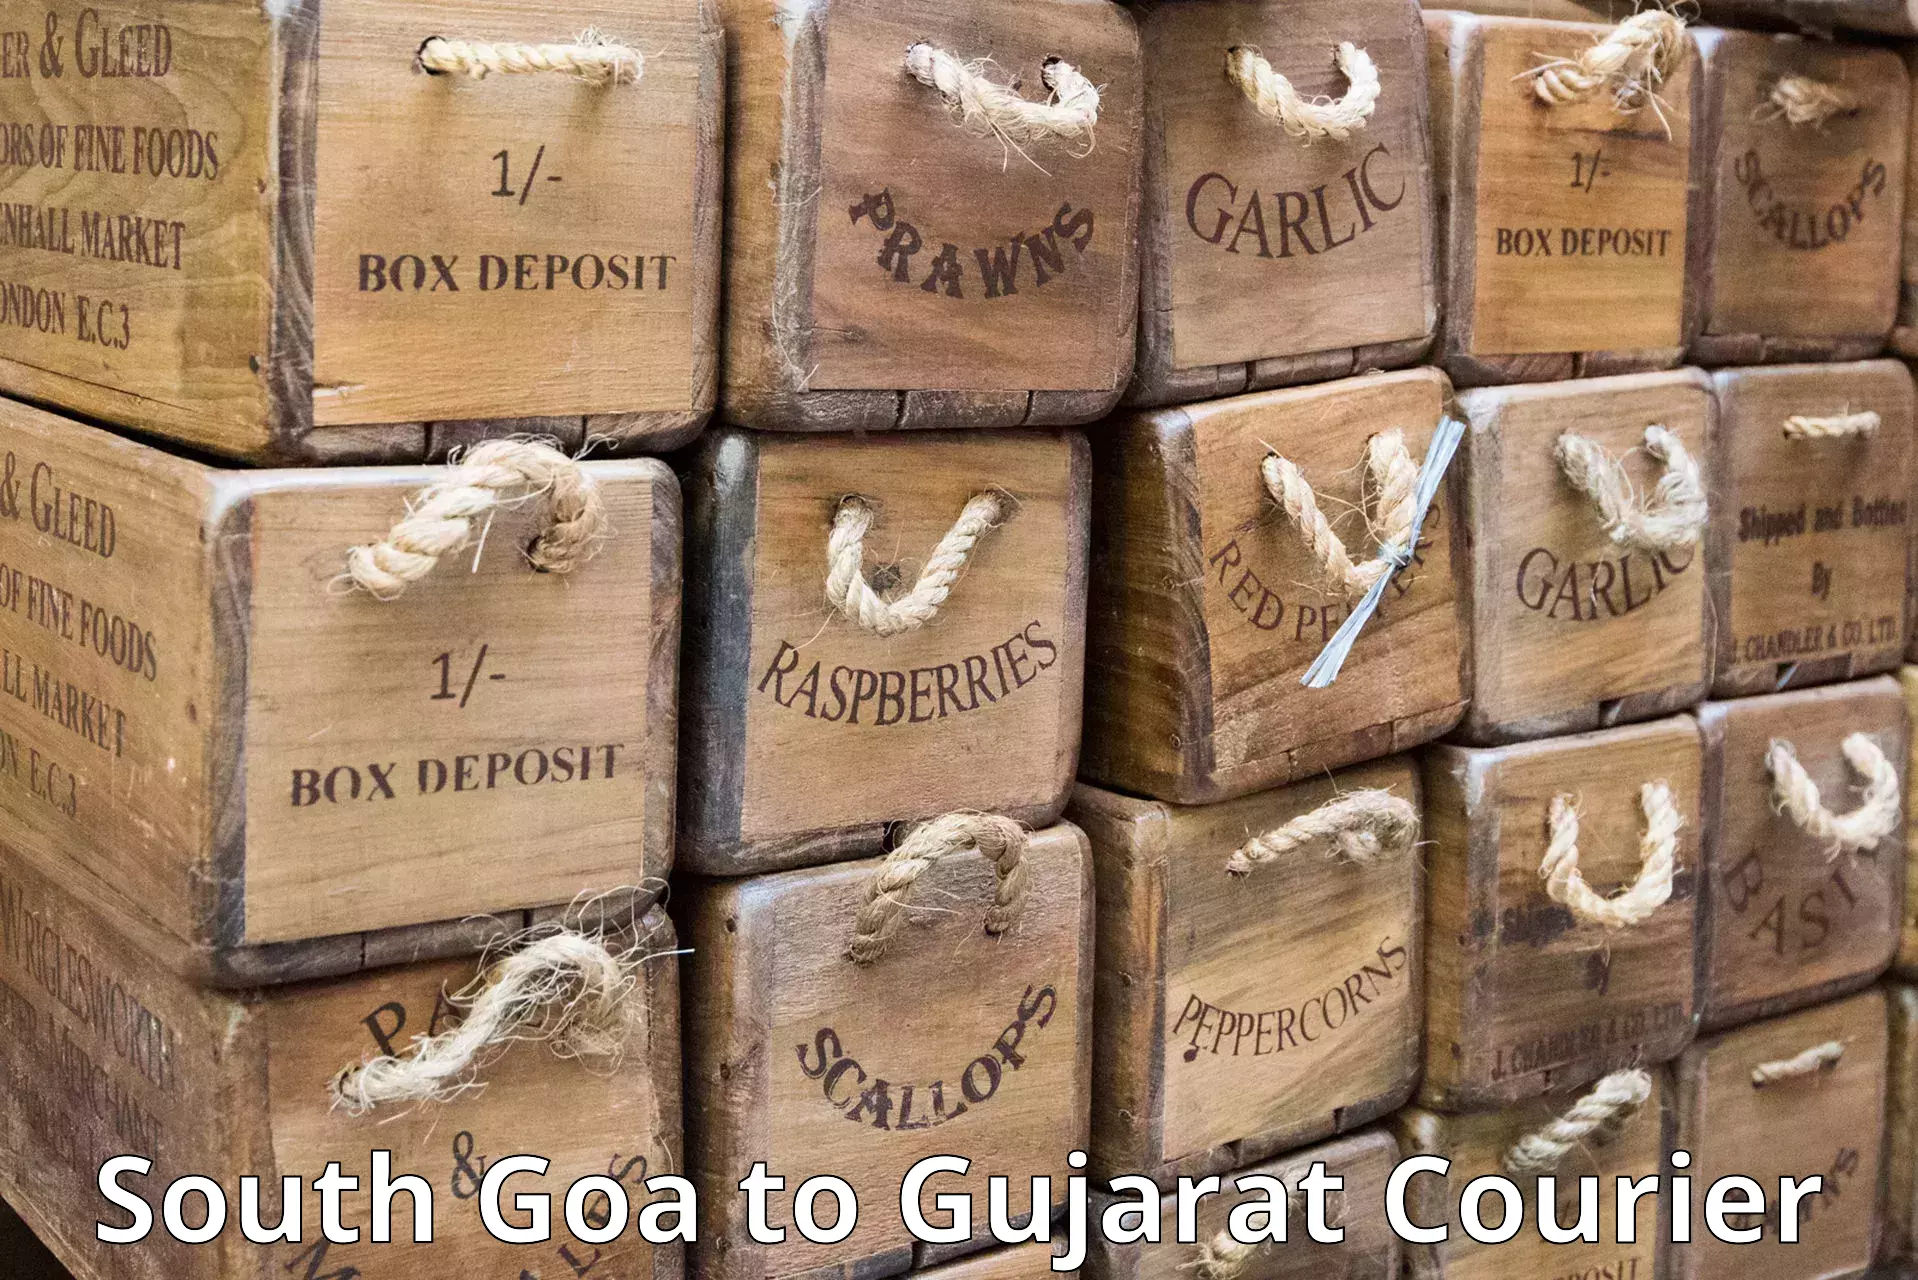 Courier service efficiency South Goa to Keshod